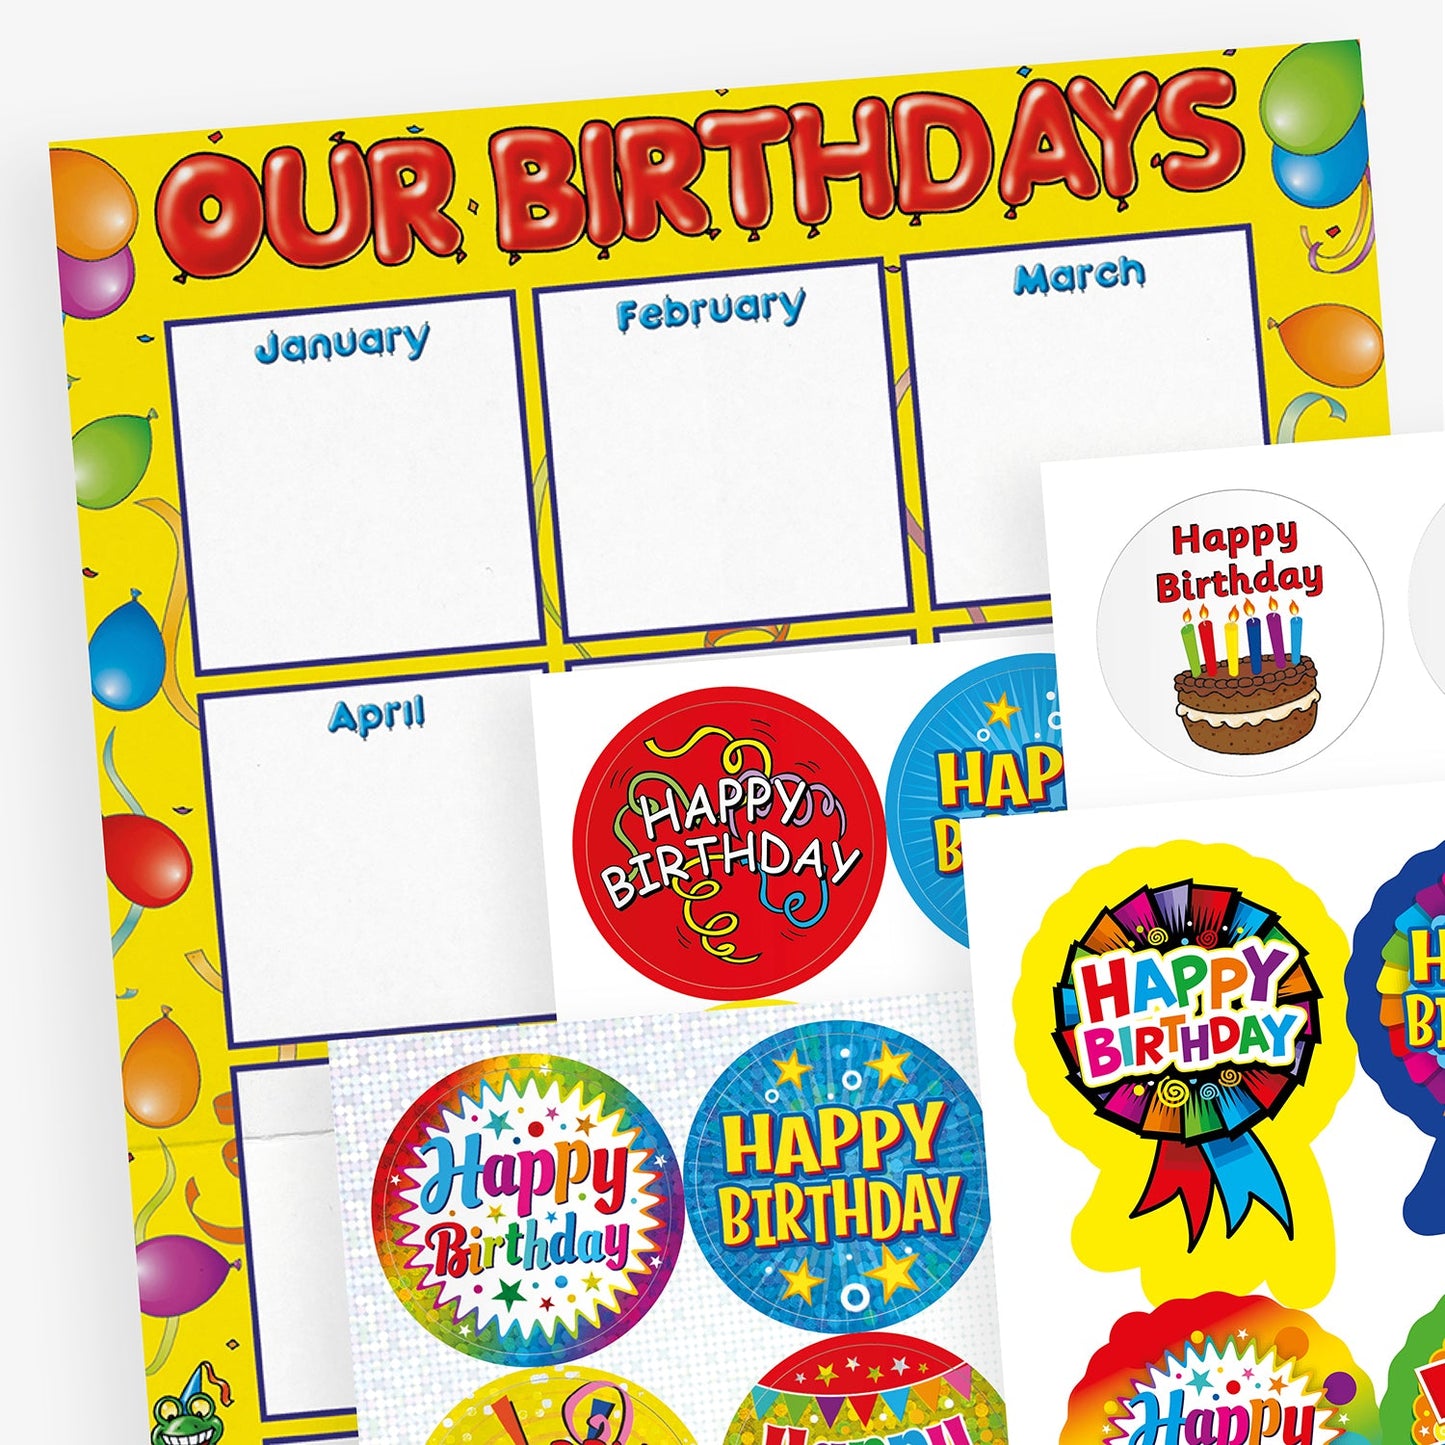 540 Happy Birthday Stickers, Poster and Sample Certificate